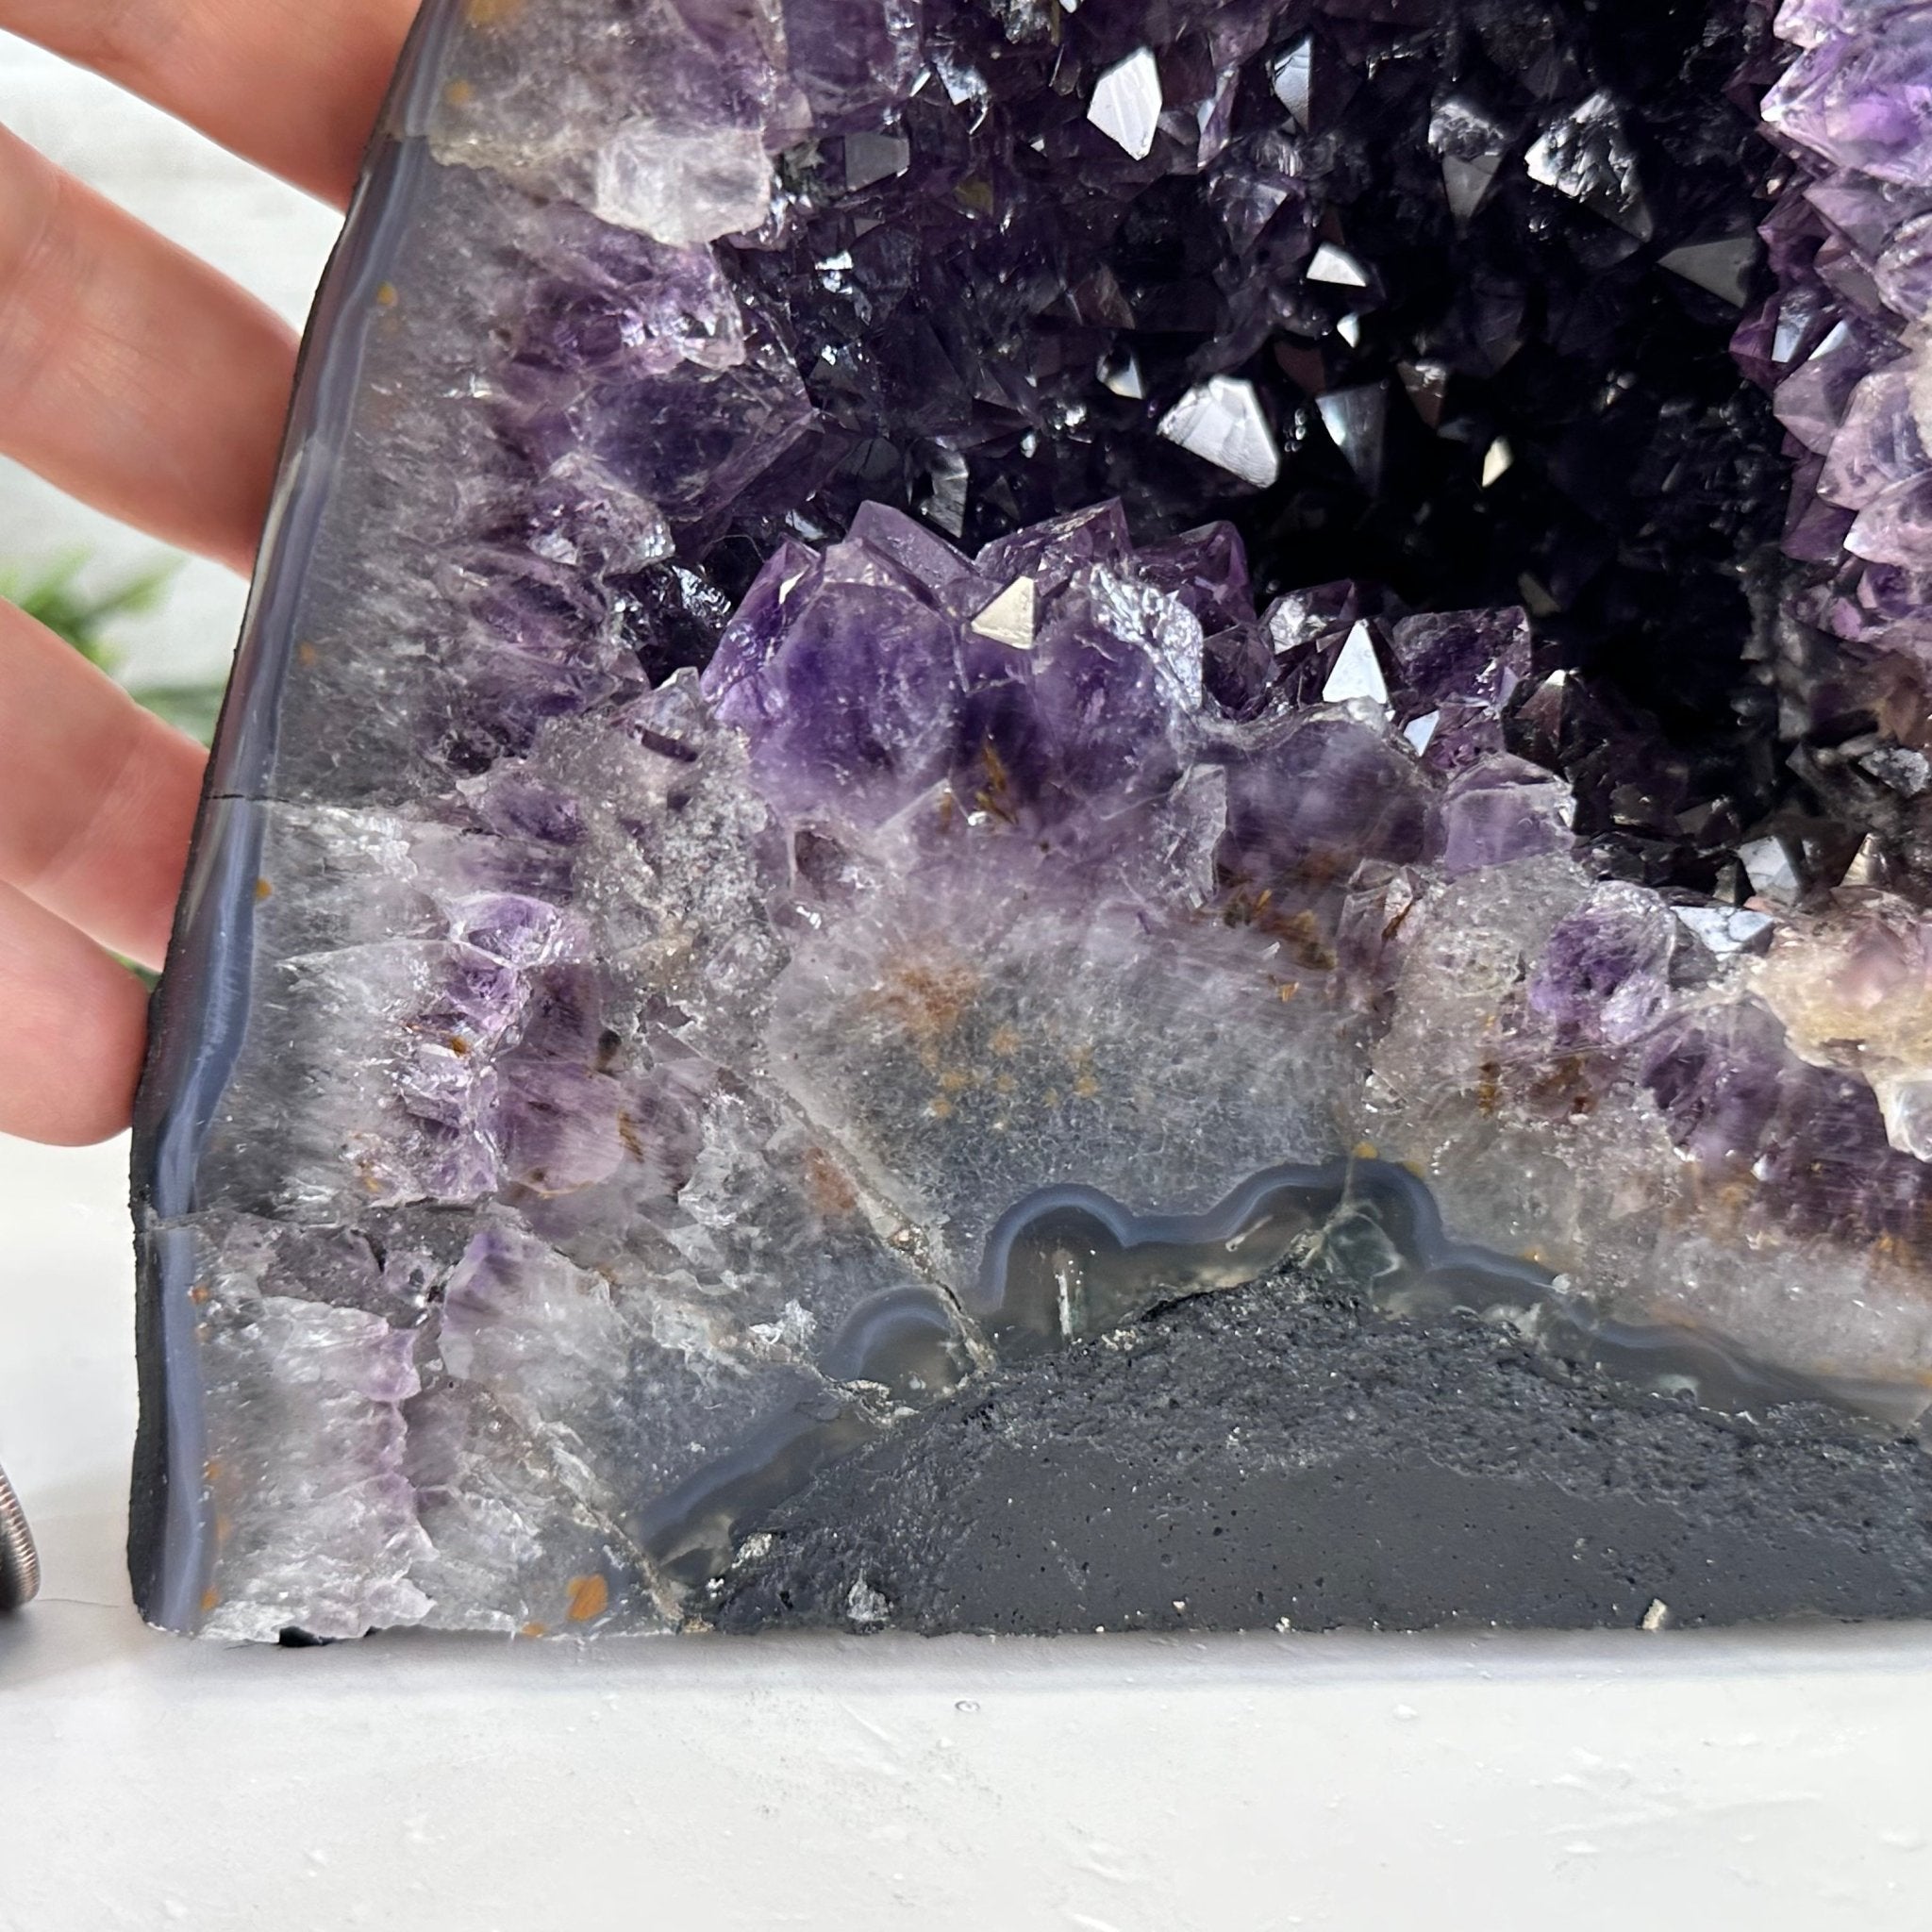 Extra Plus Quality Brazilian Amethyst Cathedral, 8.5 lbs & 6.5" Tall, Model #5601-1276 by Brazil Gems - Brazil GemsBrazil GemsExtra Plus Quality Brazilian Amethyst Cathedral, 8.5 lbs & 6.5" Tall, Model #5601-1276 by Brazil GemsCathedrals5601-1276